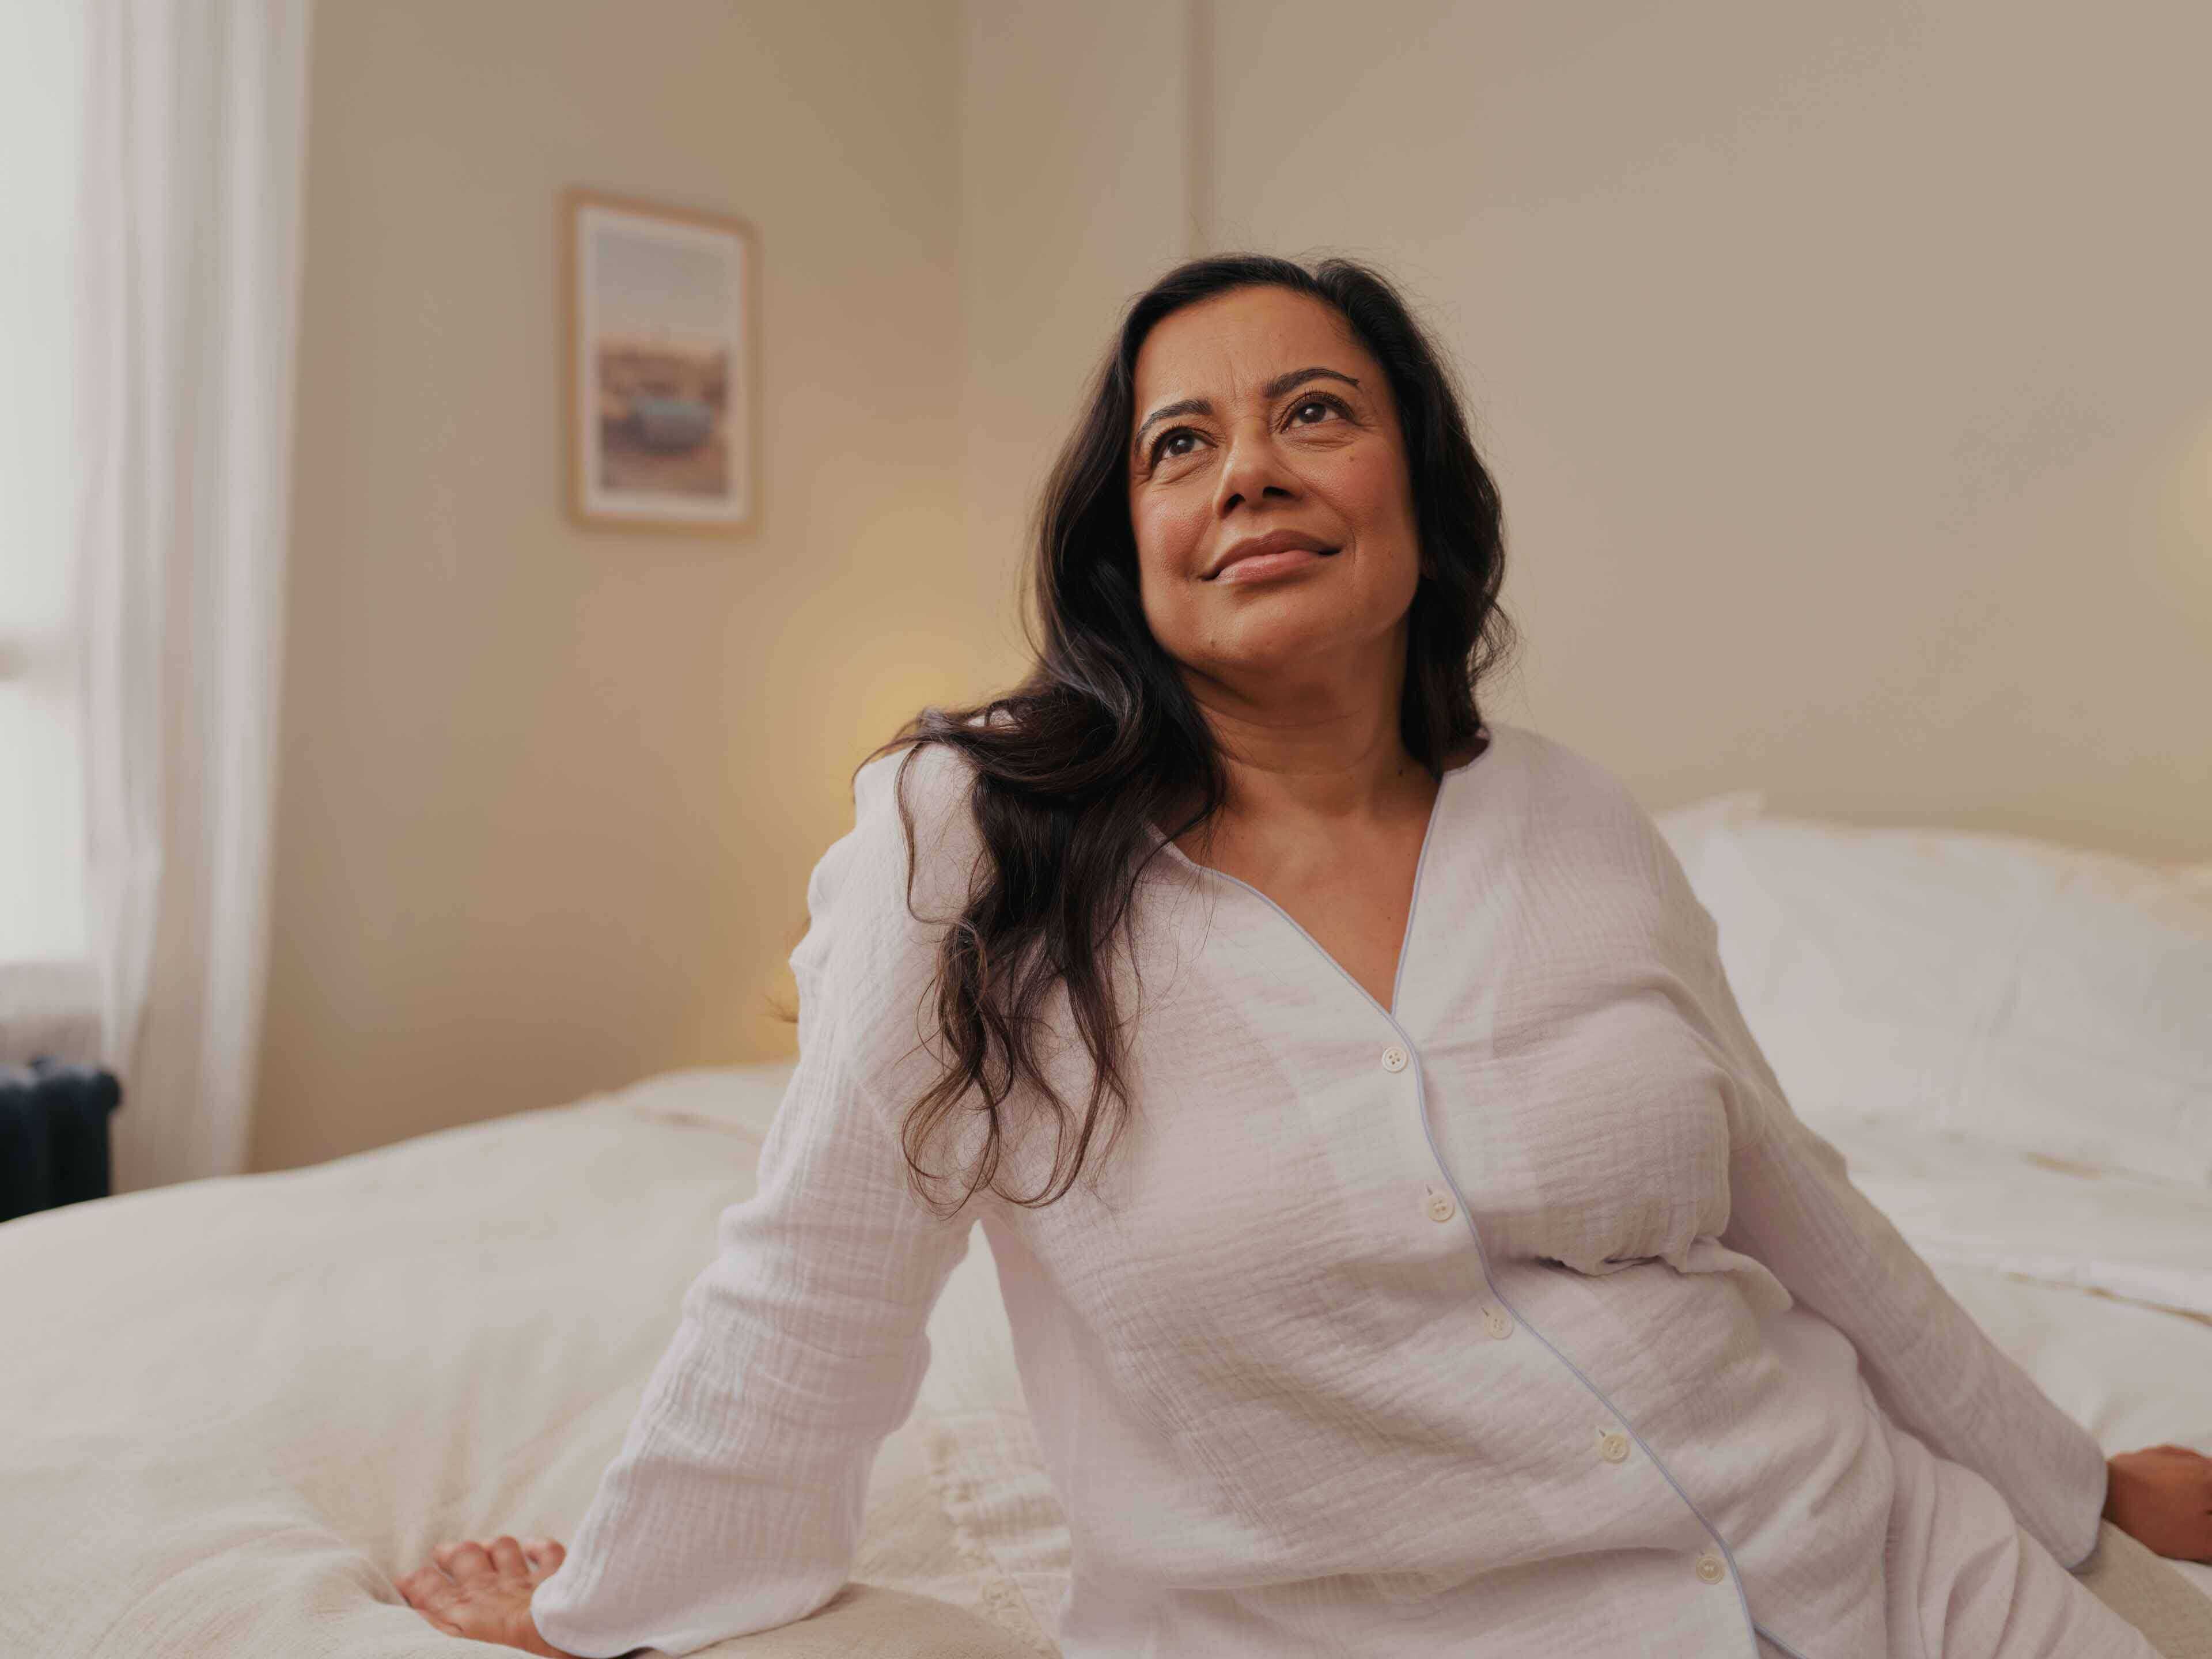 Mature woman with long dark hair sitting at the edge of her bed wearing pyjamas looking outward smiling and looking well rested